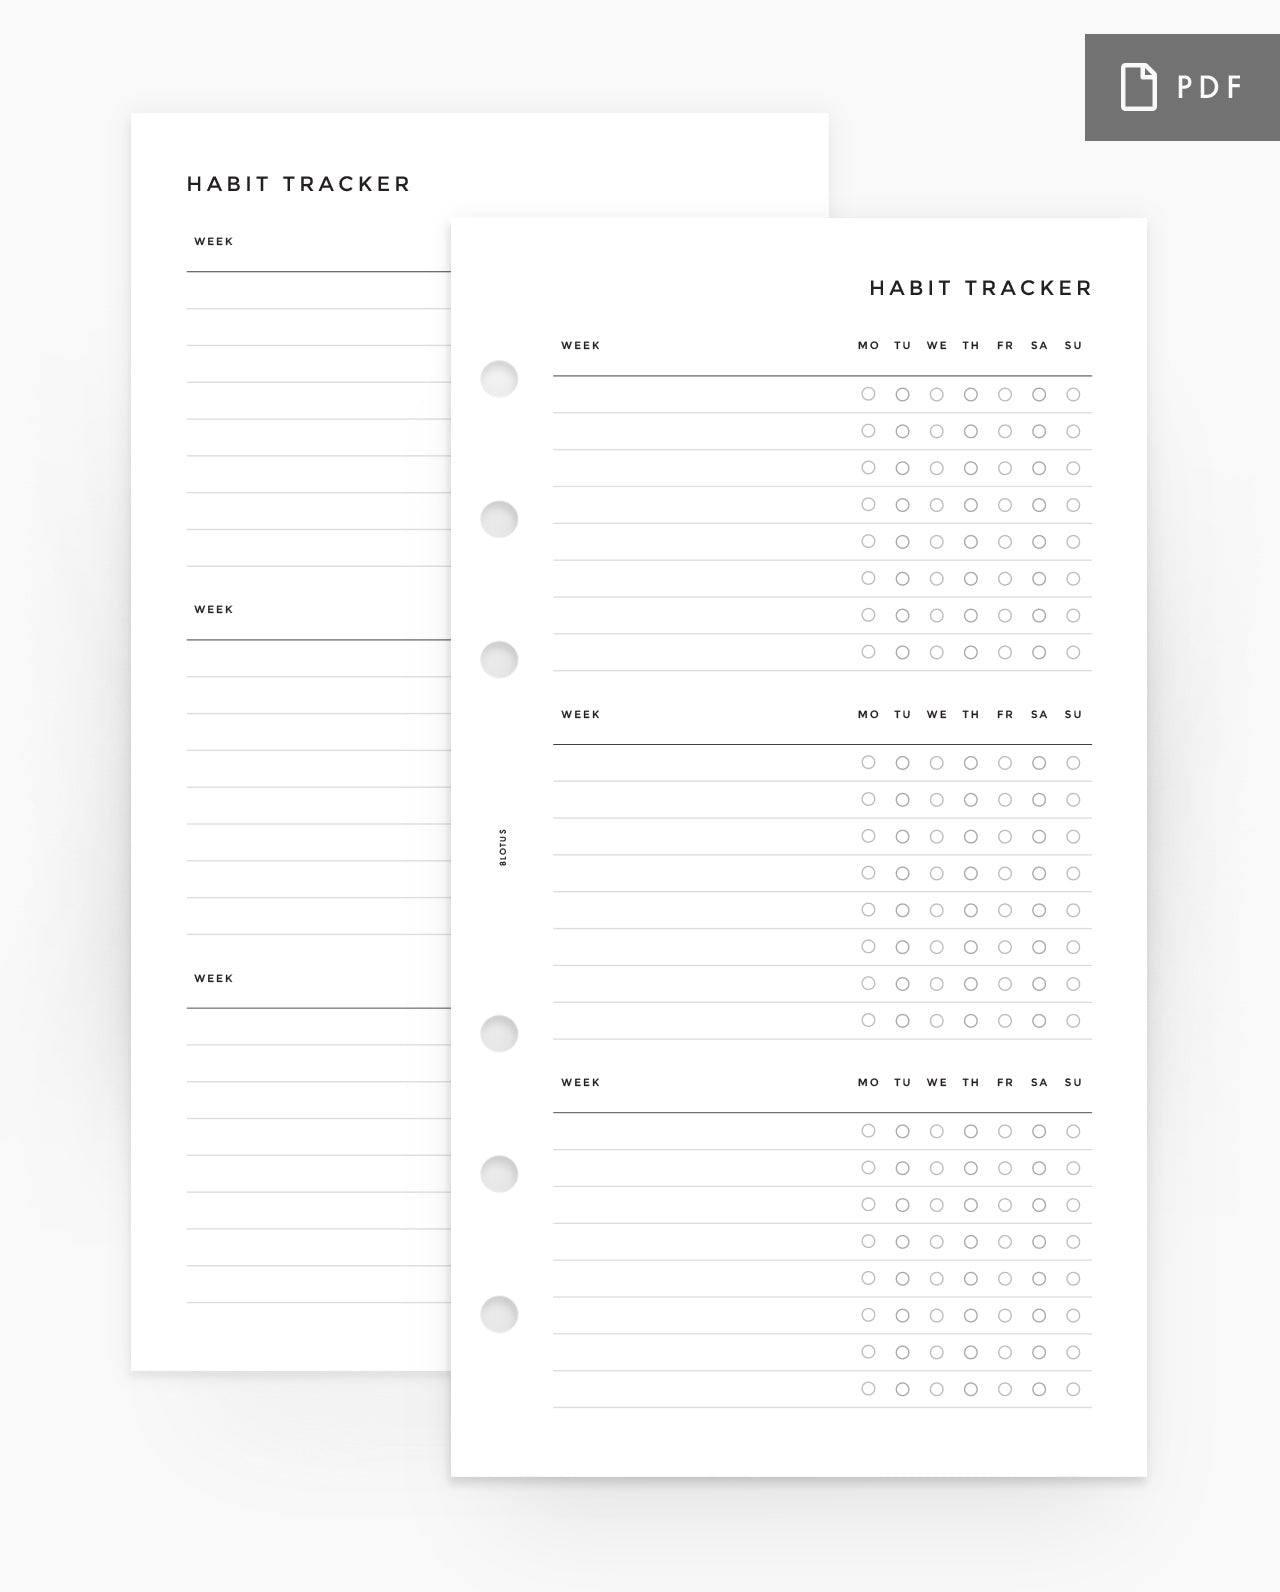 Daily Planner Inserts Personal Size Printable Filofax Undated 